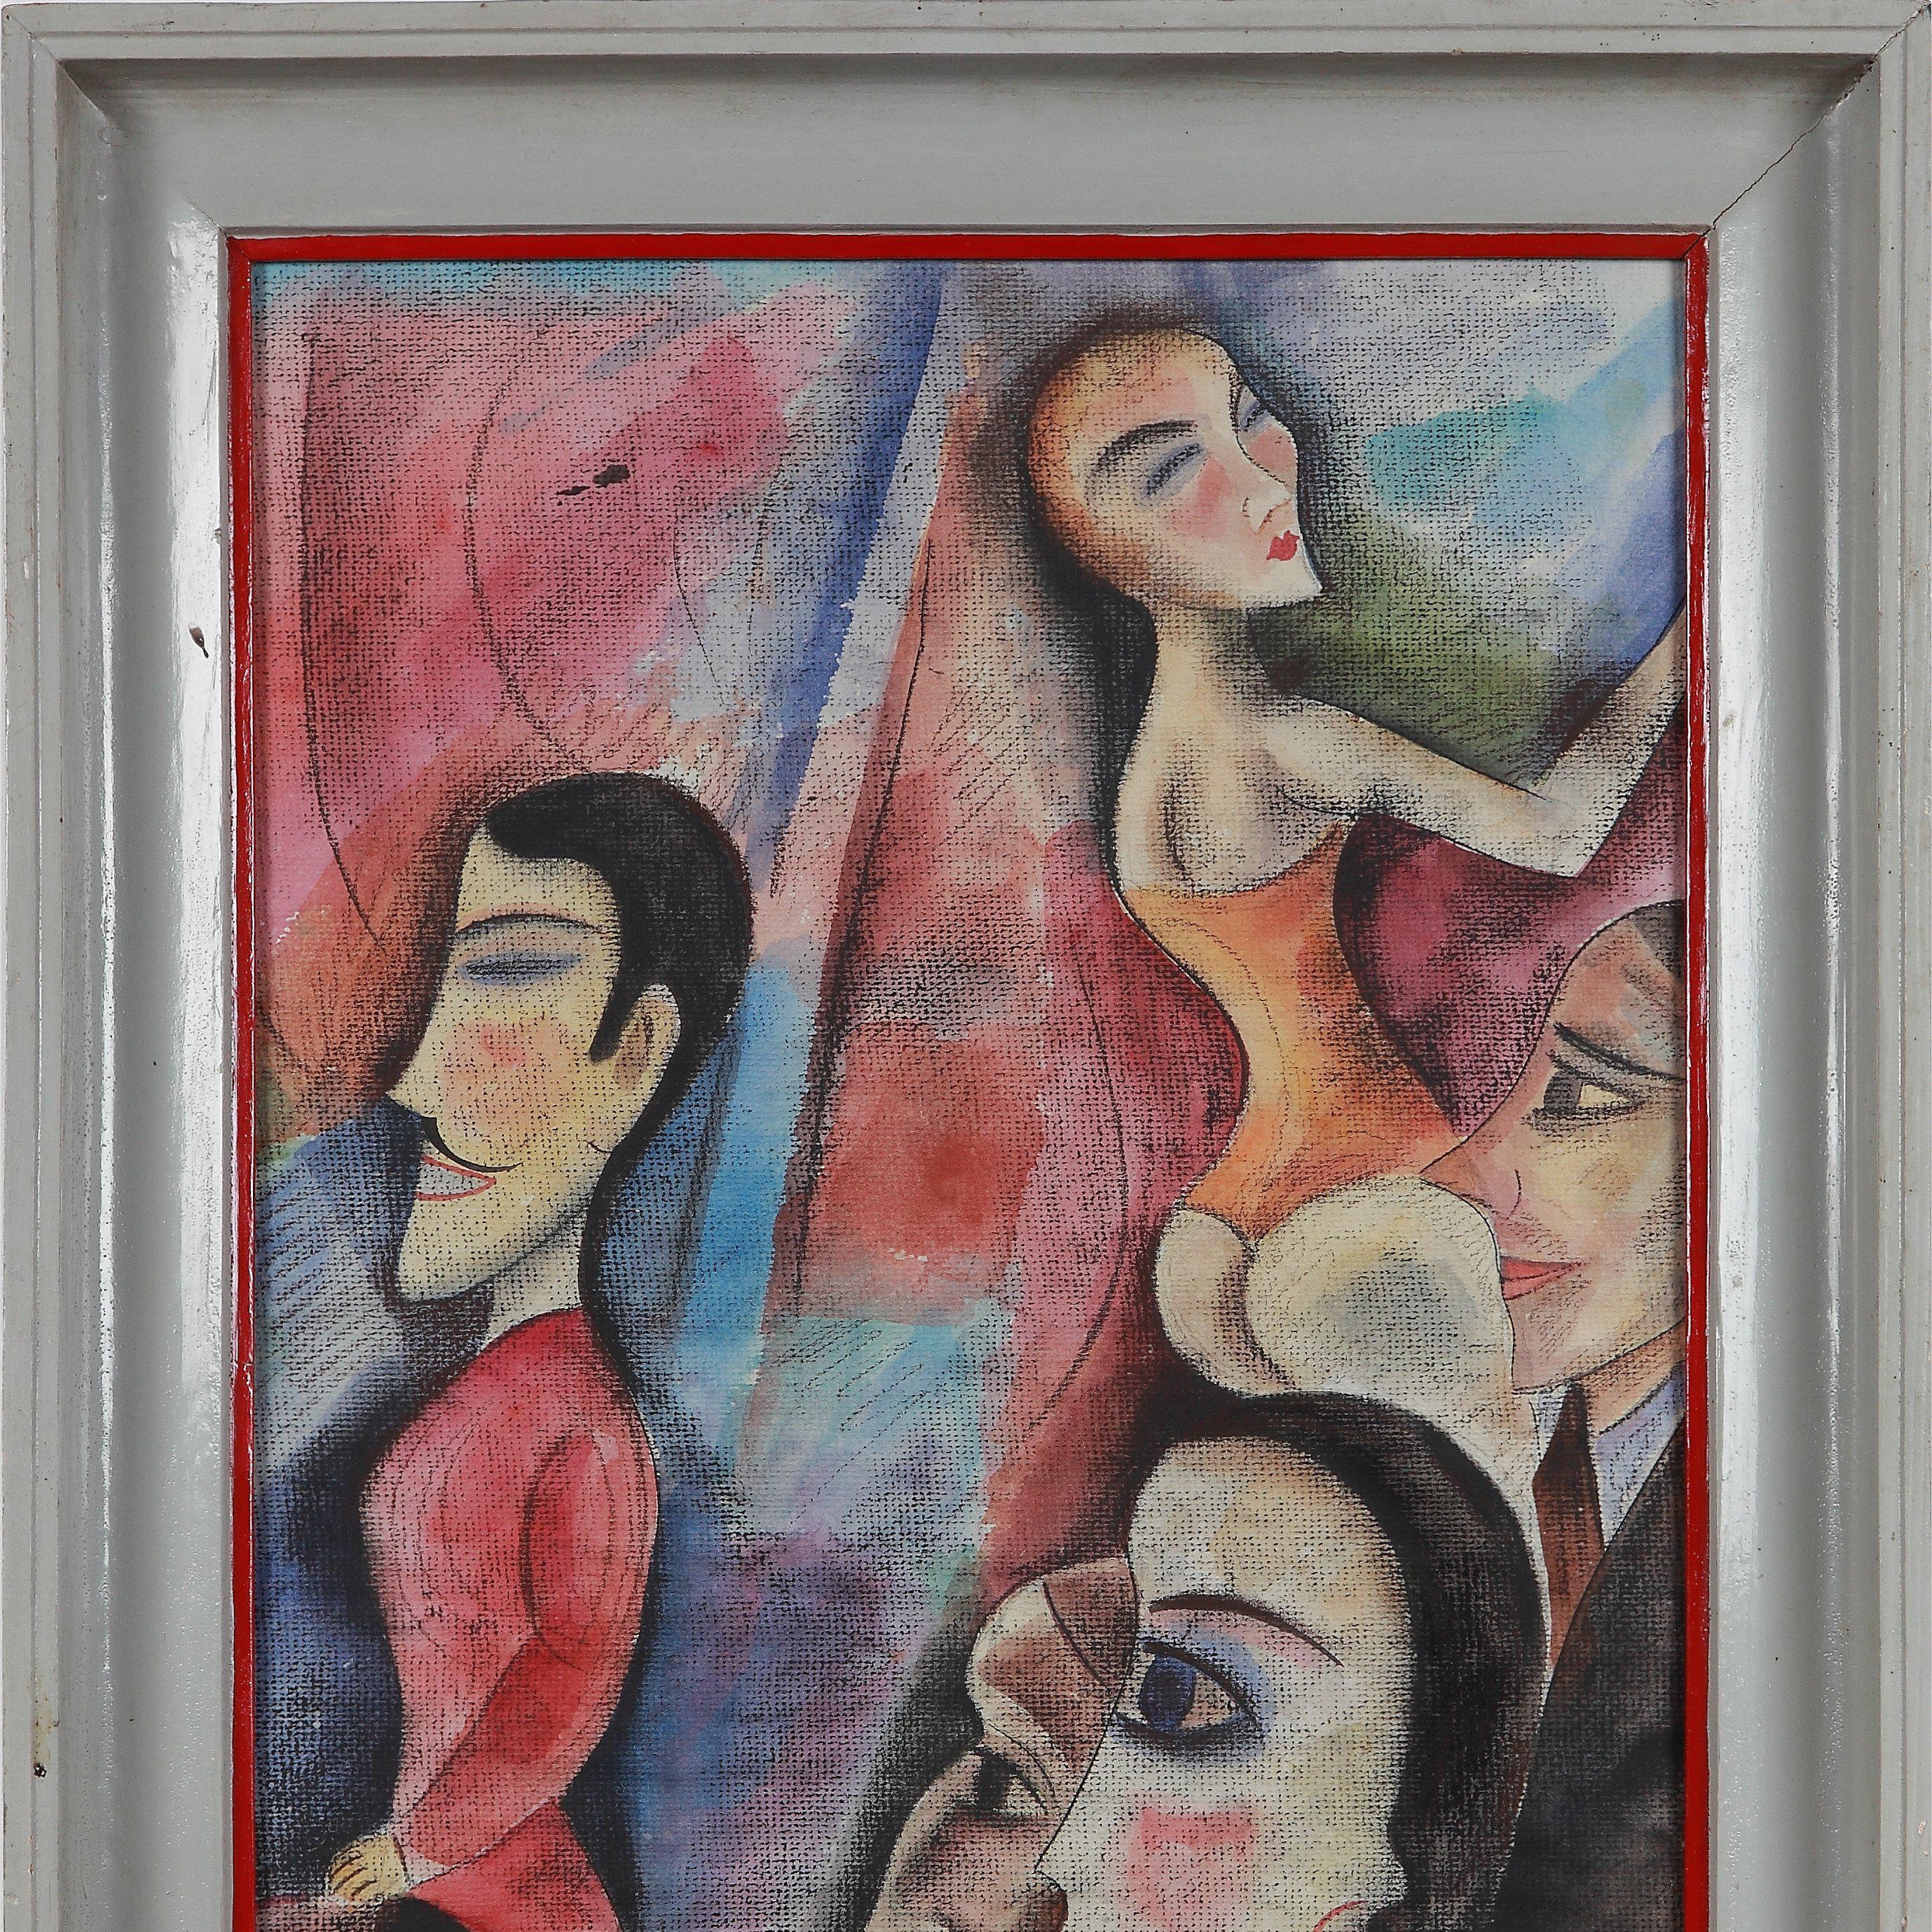 Mixed Media on papier. Signed lover left: ZAZA. Dated irrecognizable. Framed. Measurements: 26.57 x 15.16 in ( 67,5 x 38,5 cm )

Zaza Tuschmalischvili ( born 15 May 1960 in Skra, Georgia ) is a Georgian painter, living and working in Berlin since